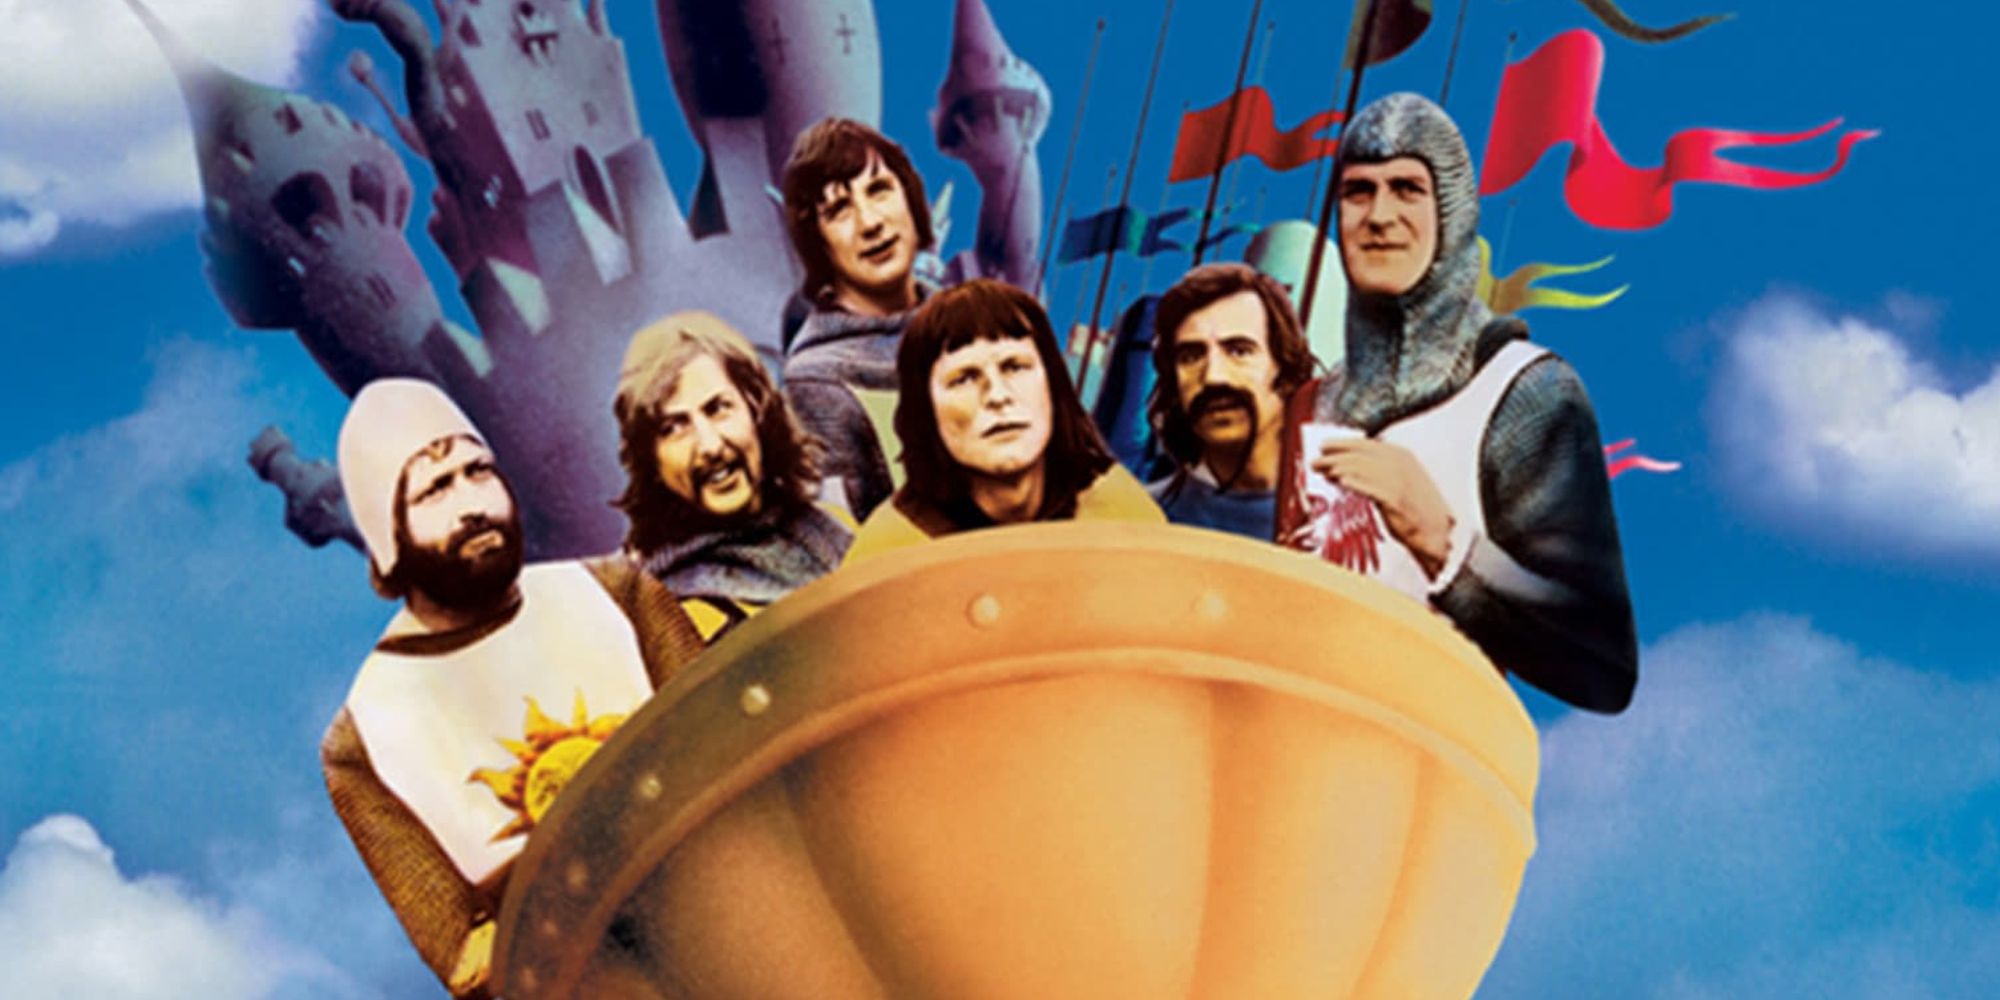 Monty Python and the Holy Grail - poster - 1975